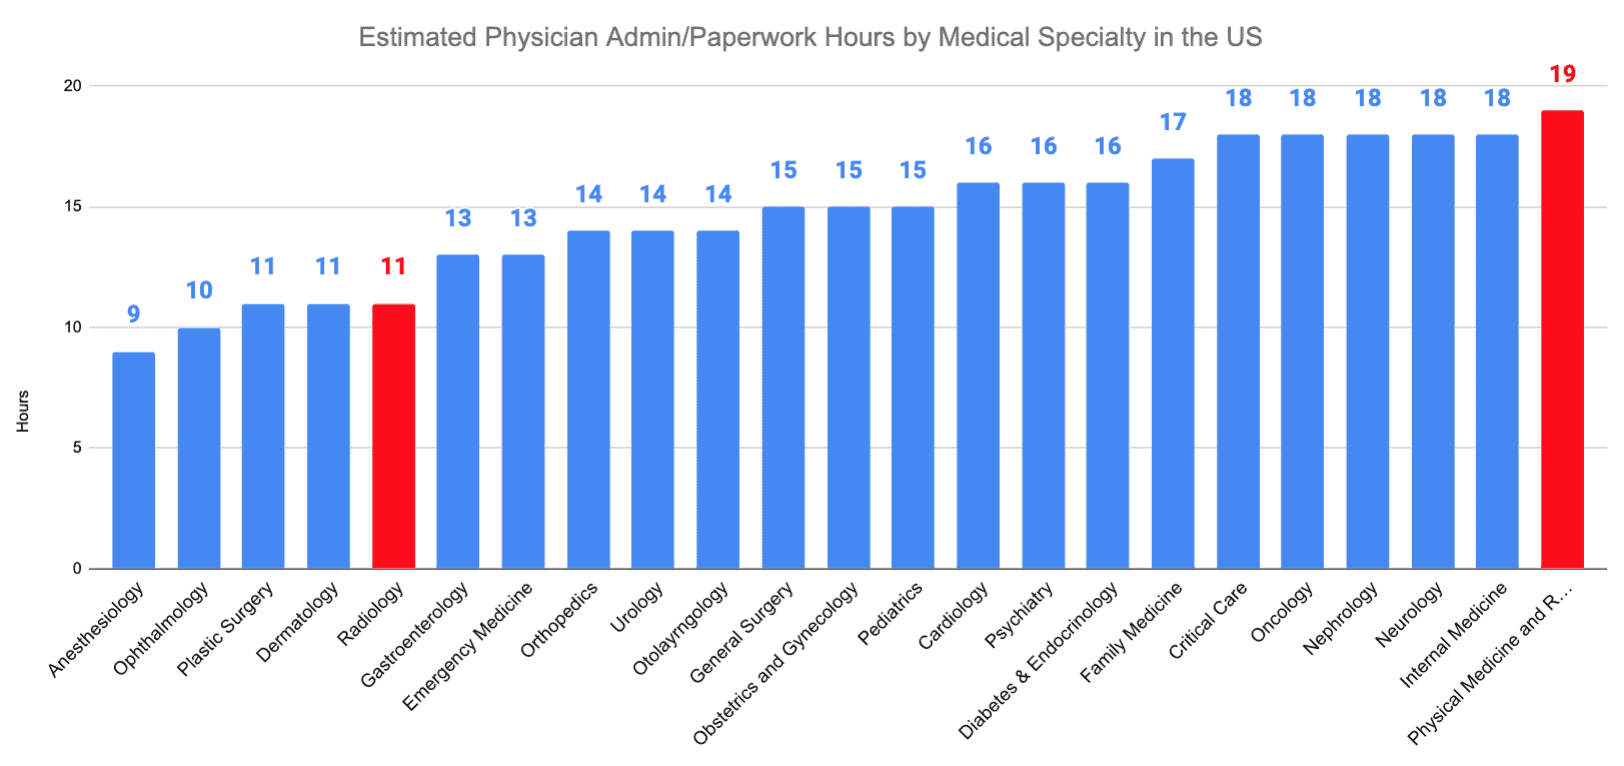 Radiology vs. Physical Medicine &amp; Rehabilitation Estimated Physician Admin/Paperwork Hours by Medical Specialty in the US